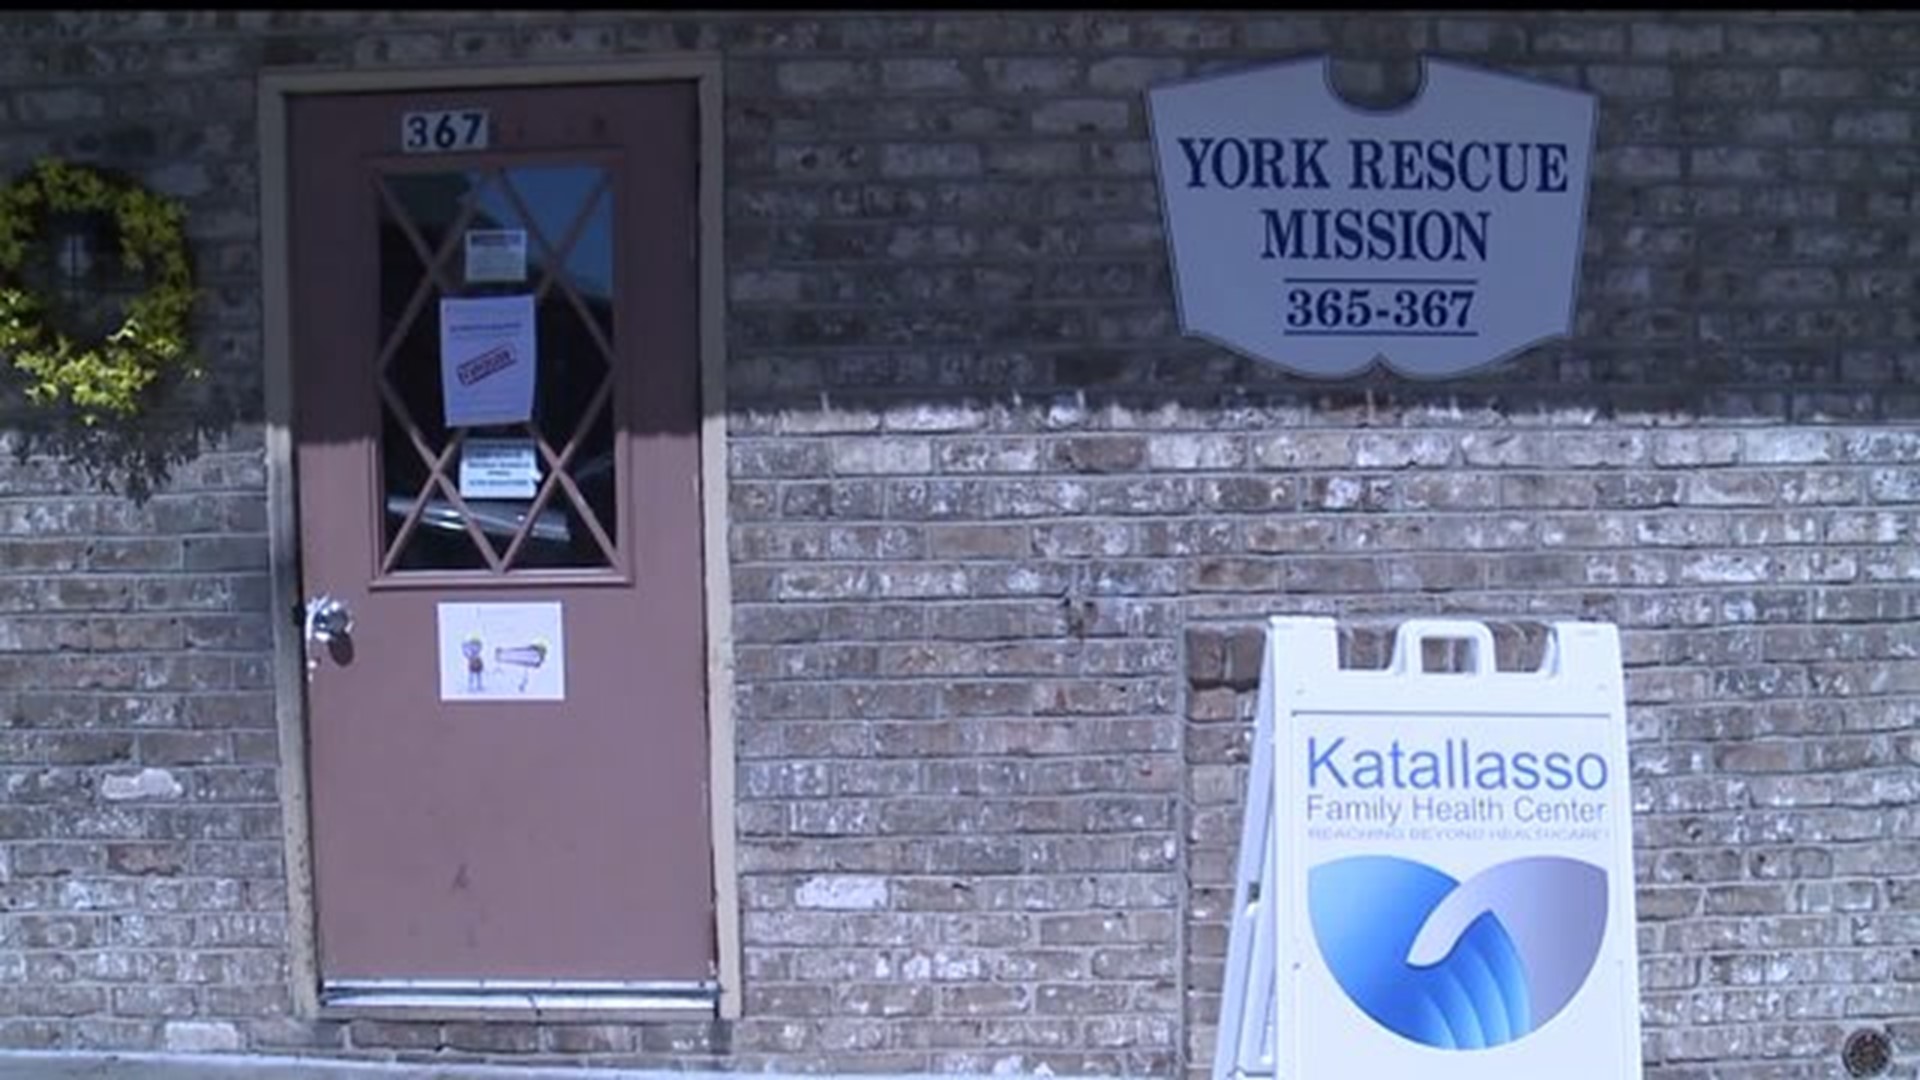 York rescue mission expands health services